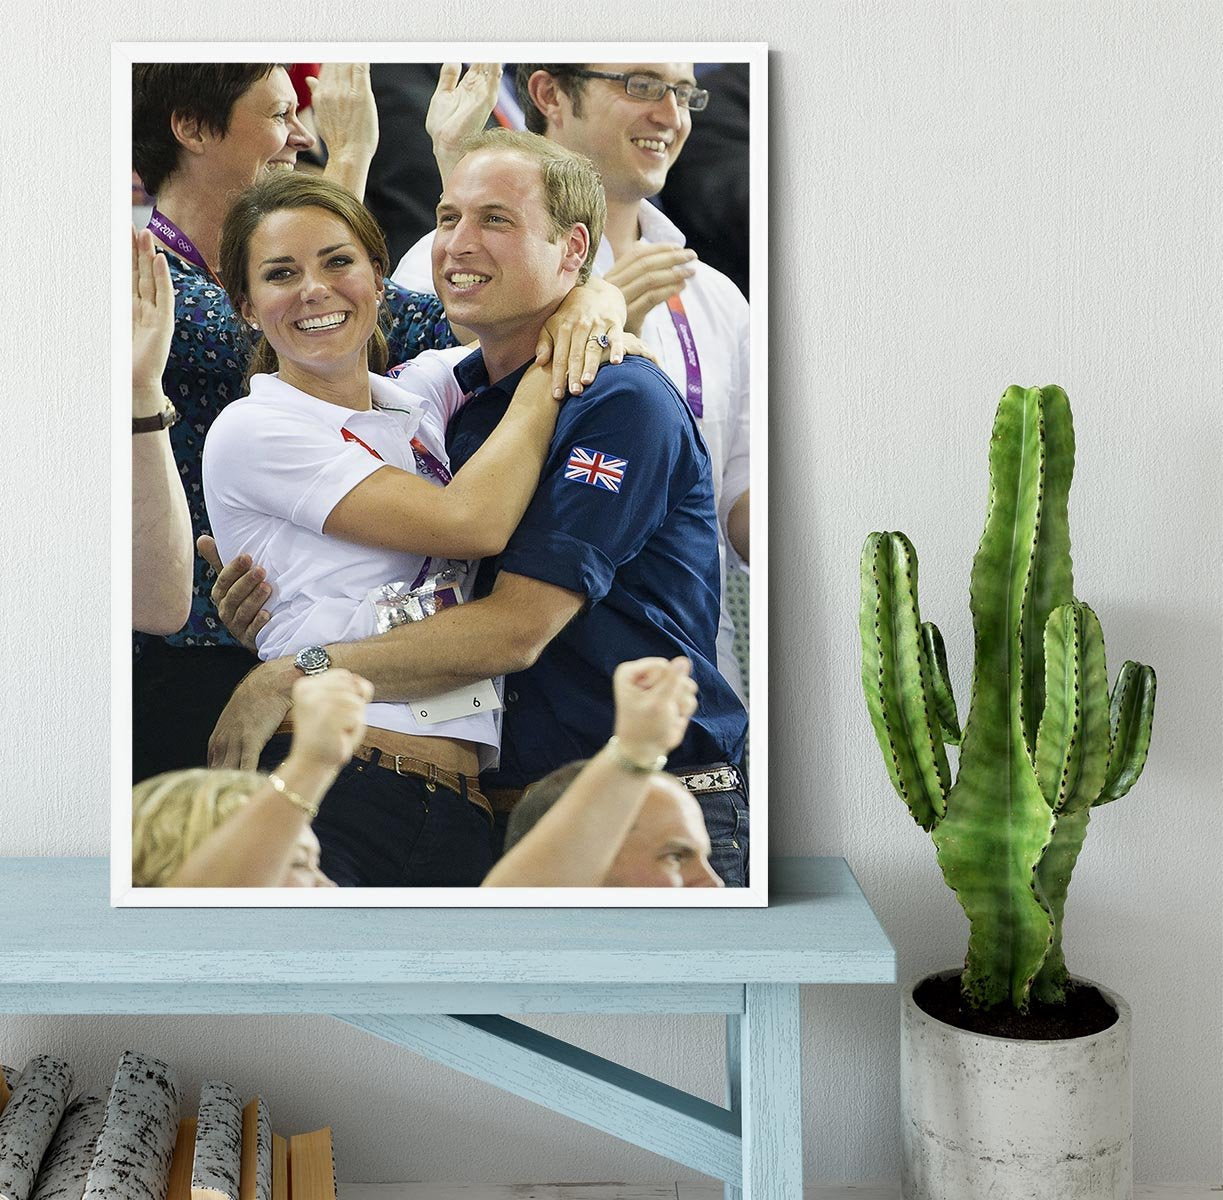 Prince William and Kate hugging at the 2012 Olympics Framed Print - Canvas Art Rocks -6